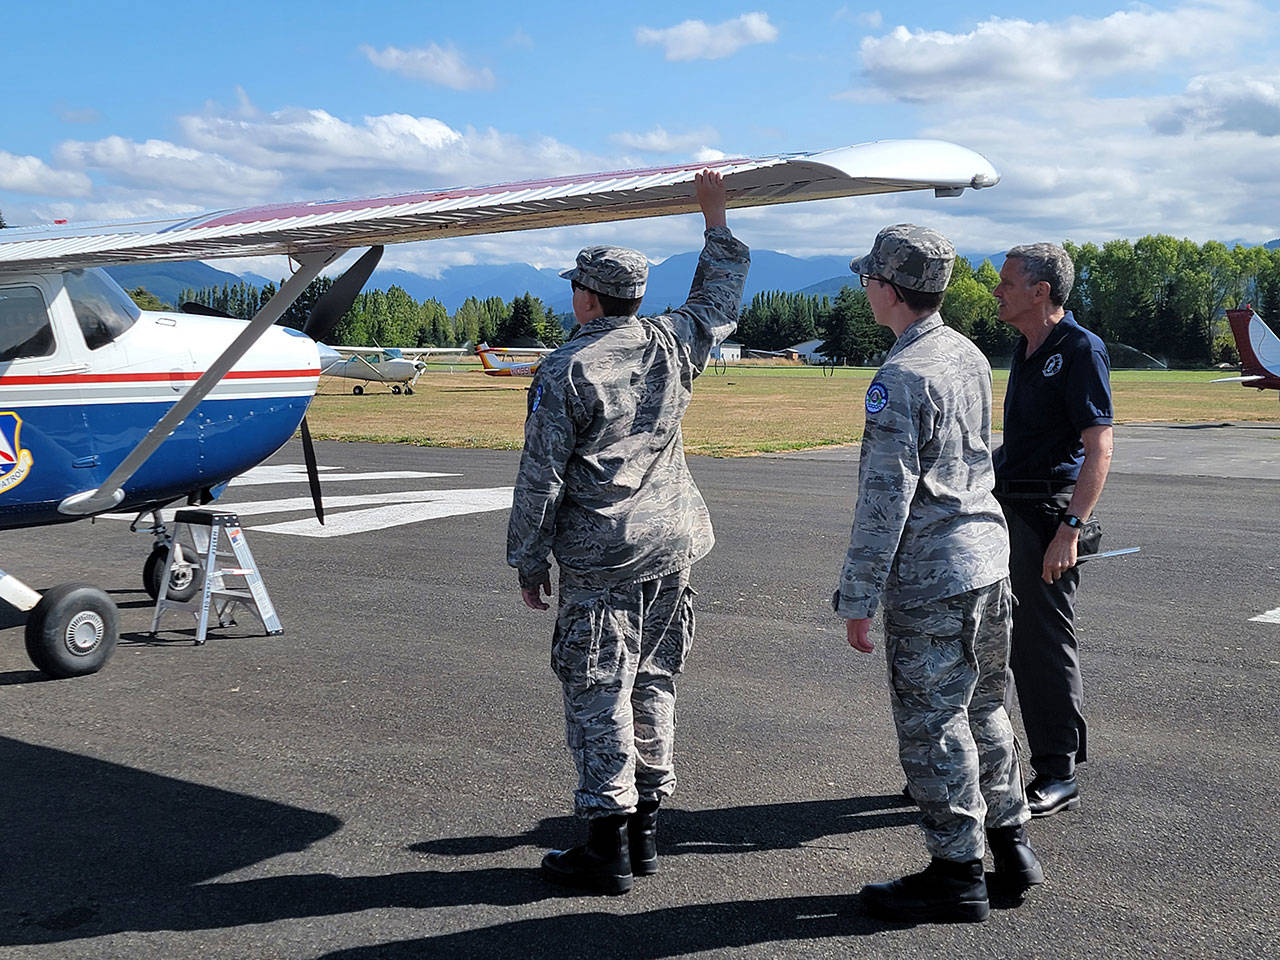 Cadets Joseph Maggard of Port Angeles and Reilly Sue of Sequim test aircraft aileron as Capt. John Weidman of Bremerton looks on.